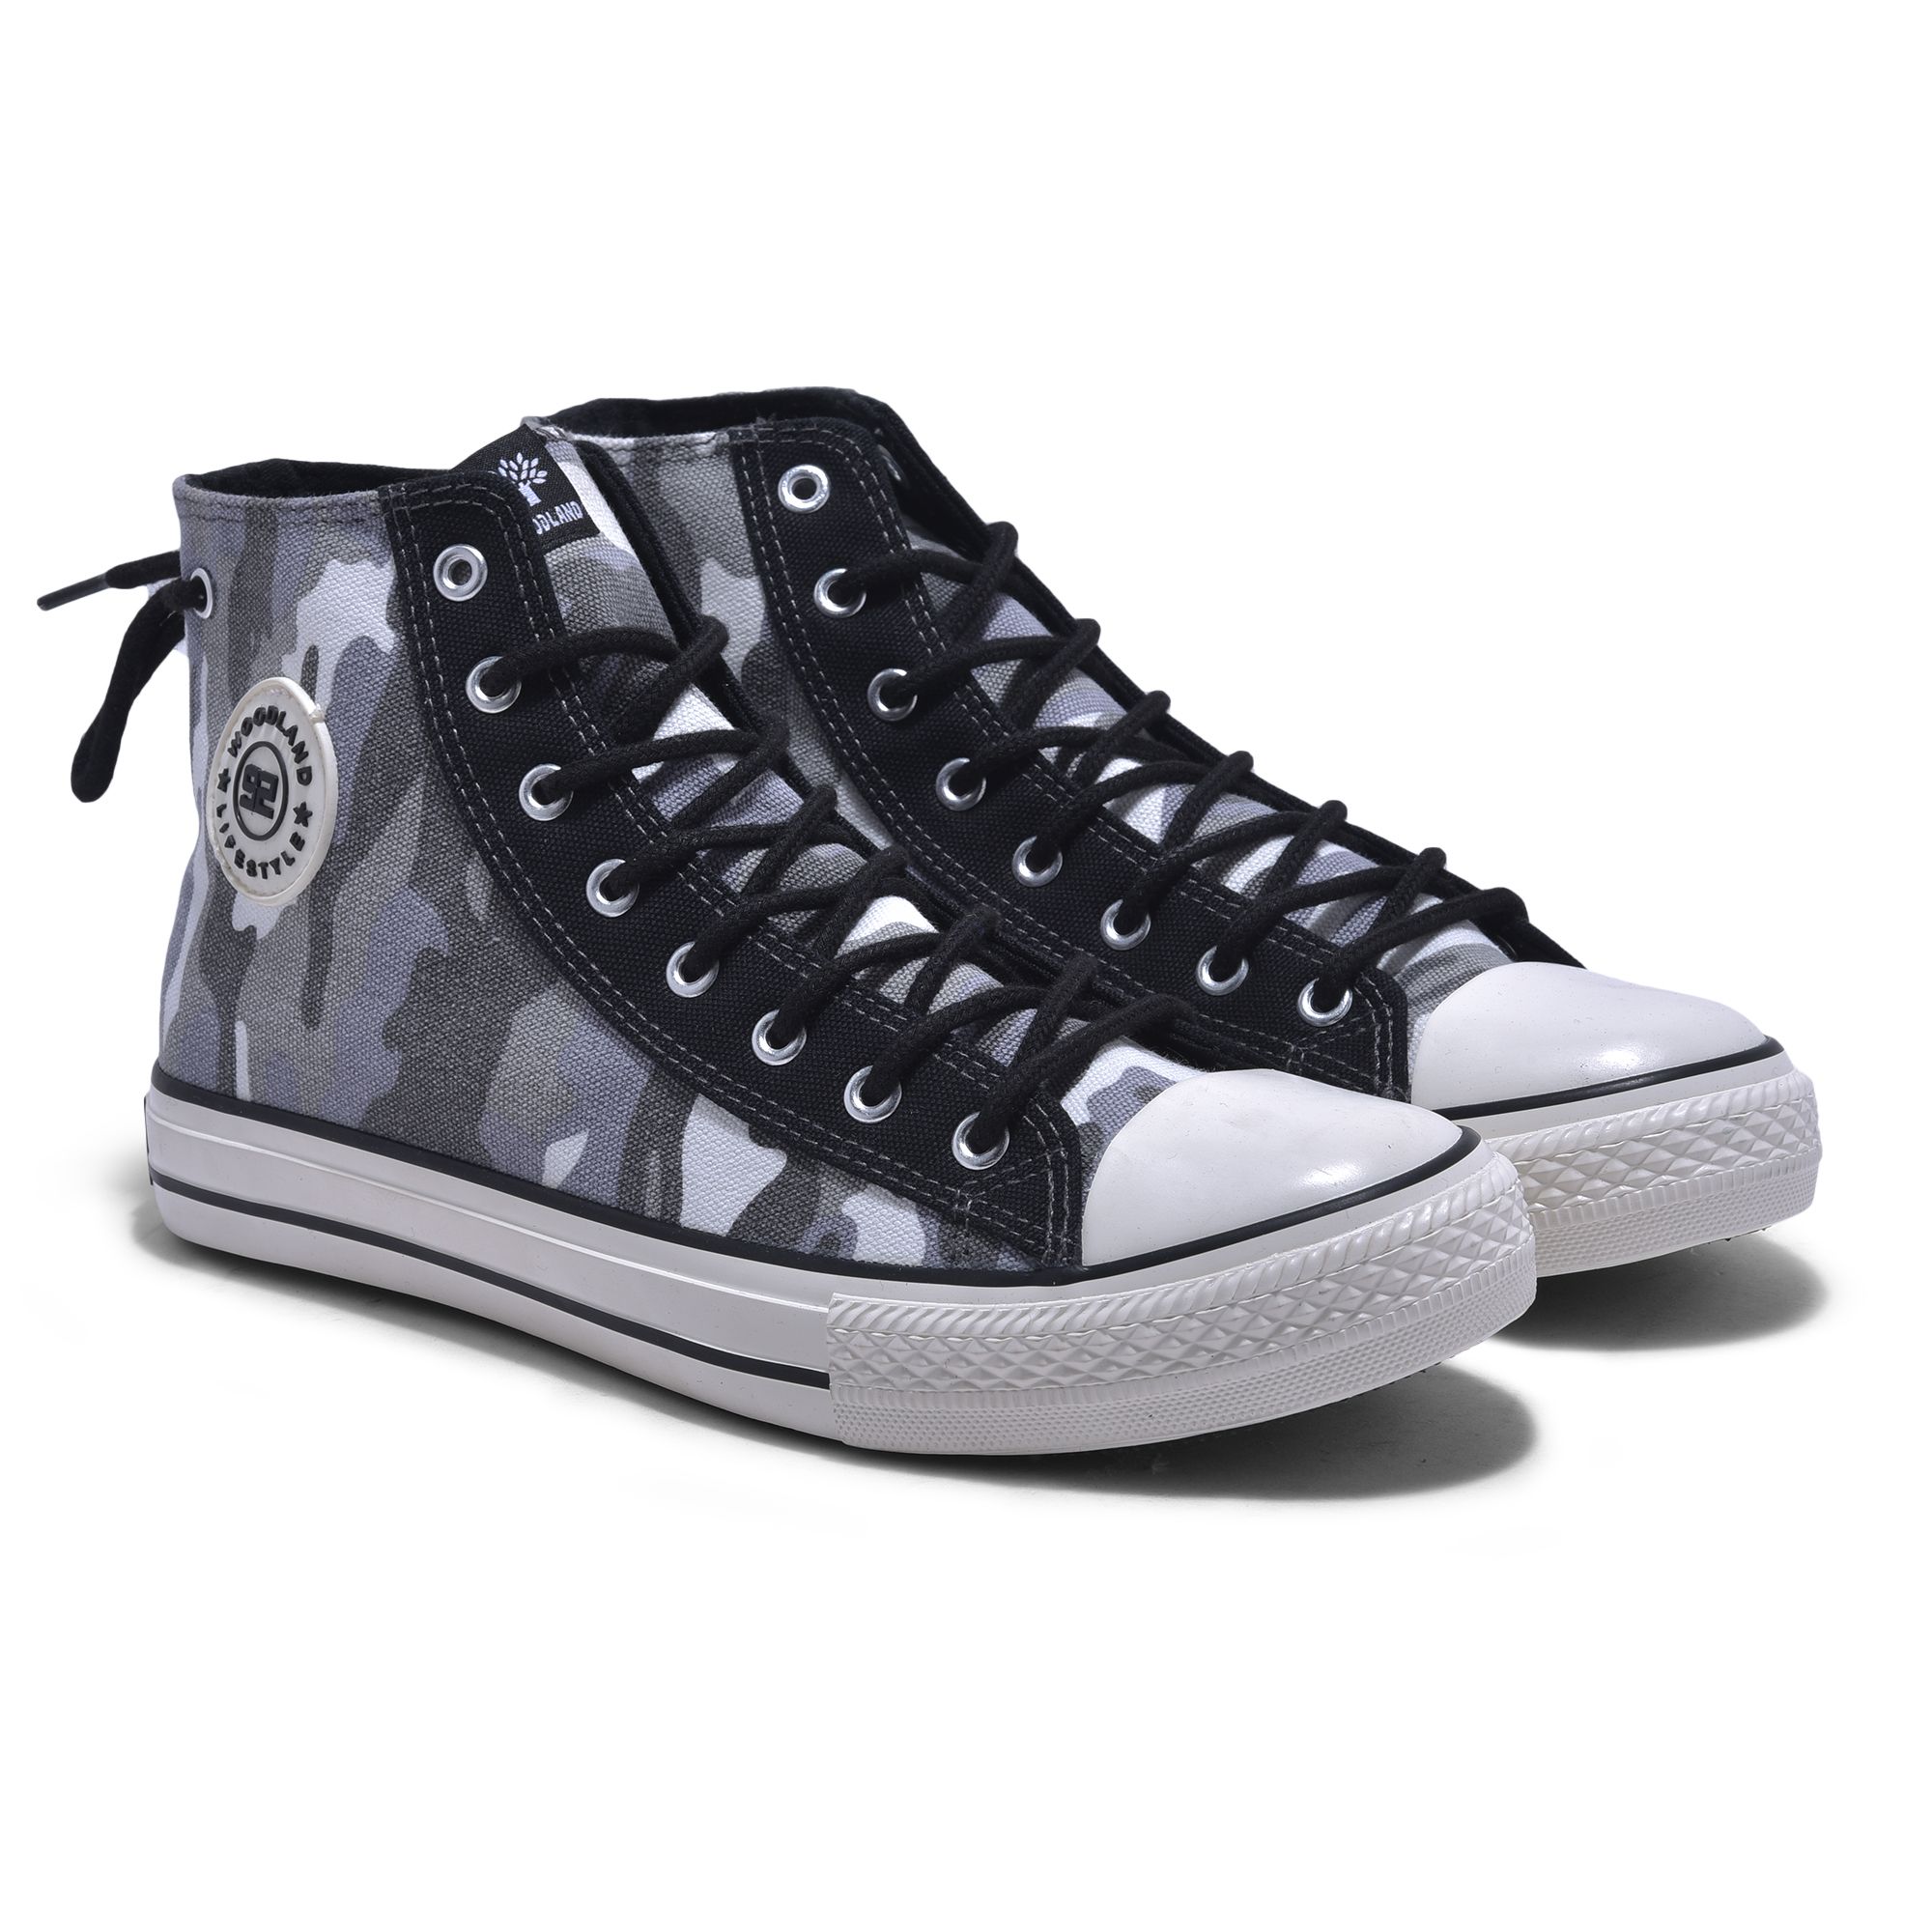 Converse Chuck Taylor All Star Hi Ankle Lace Sneaker - White / Dunescape |  Journeys